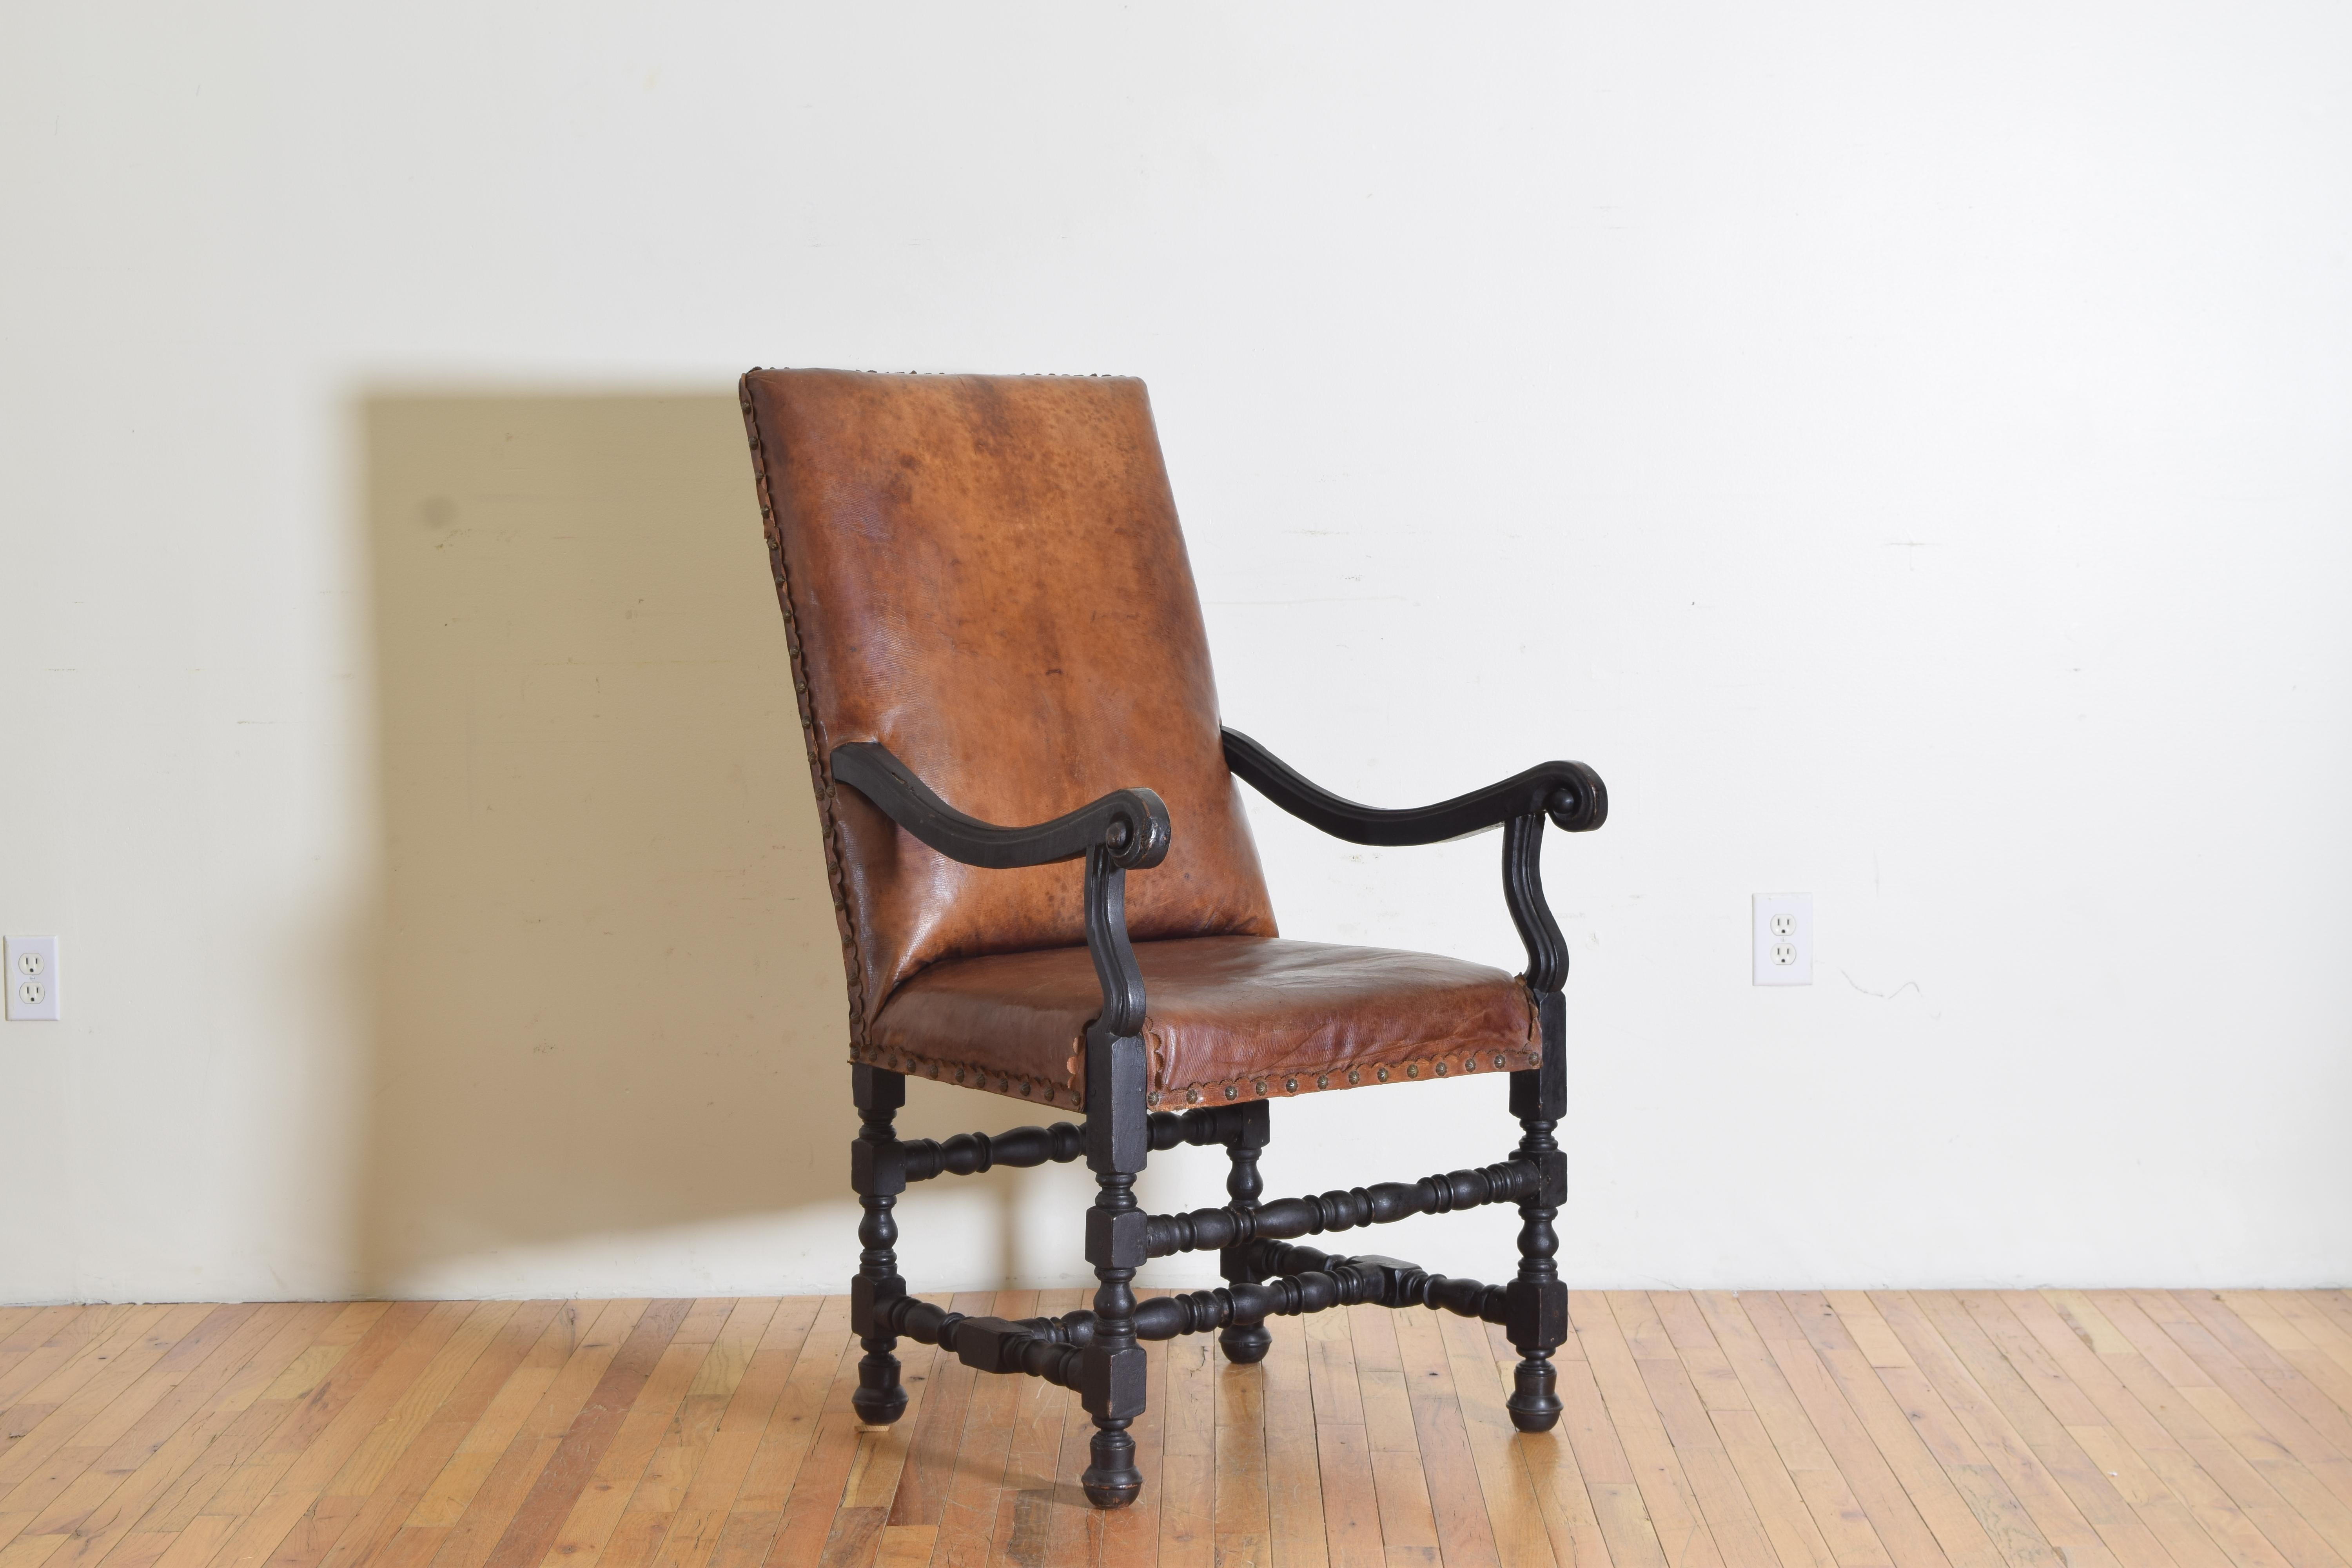 having a slanting rectangular backrest and tight seat upholstered in antique leather and trimmed in cast brass nailheads, the chair retaining its antique ebonized finish, with slightly outwardly scrolling arms raised on scrolled supports, the frame